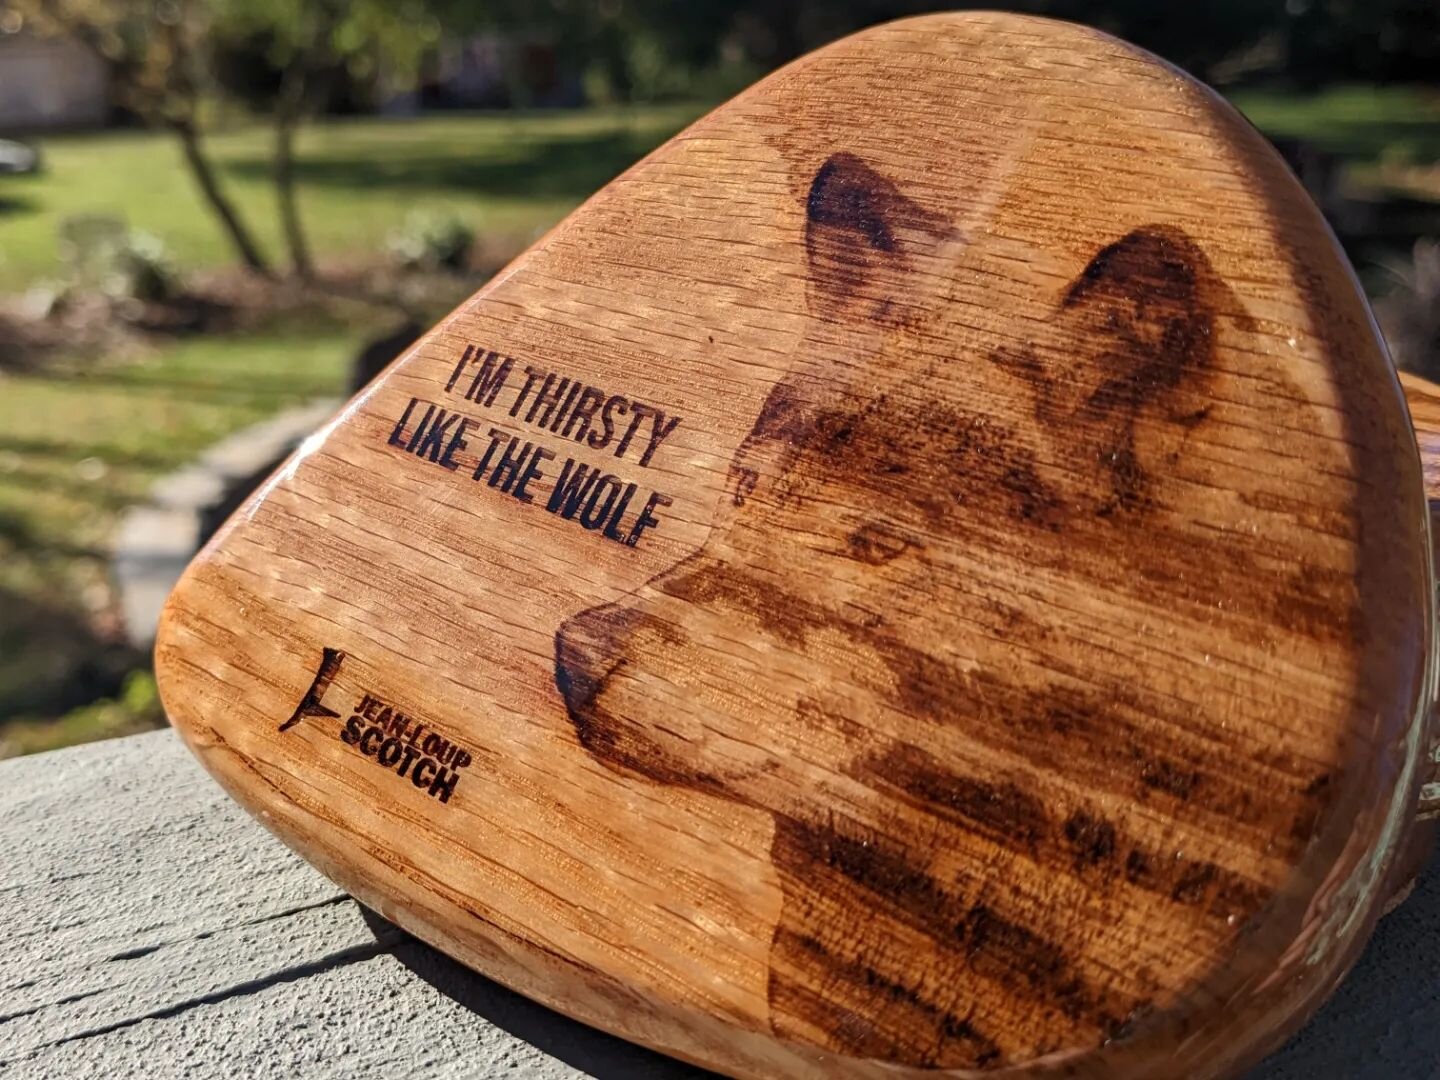 Made some coasters for a #MakerAlliance #secretsanta. I think they came out pretty well. #laserengraved #oak with #cork base and #epoxy finish. My favorite is &quot;Use a coaster or I'll bite your face off&quot; :)